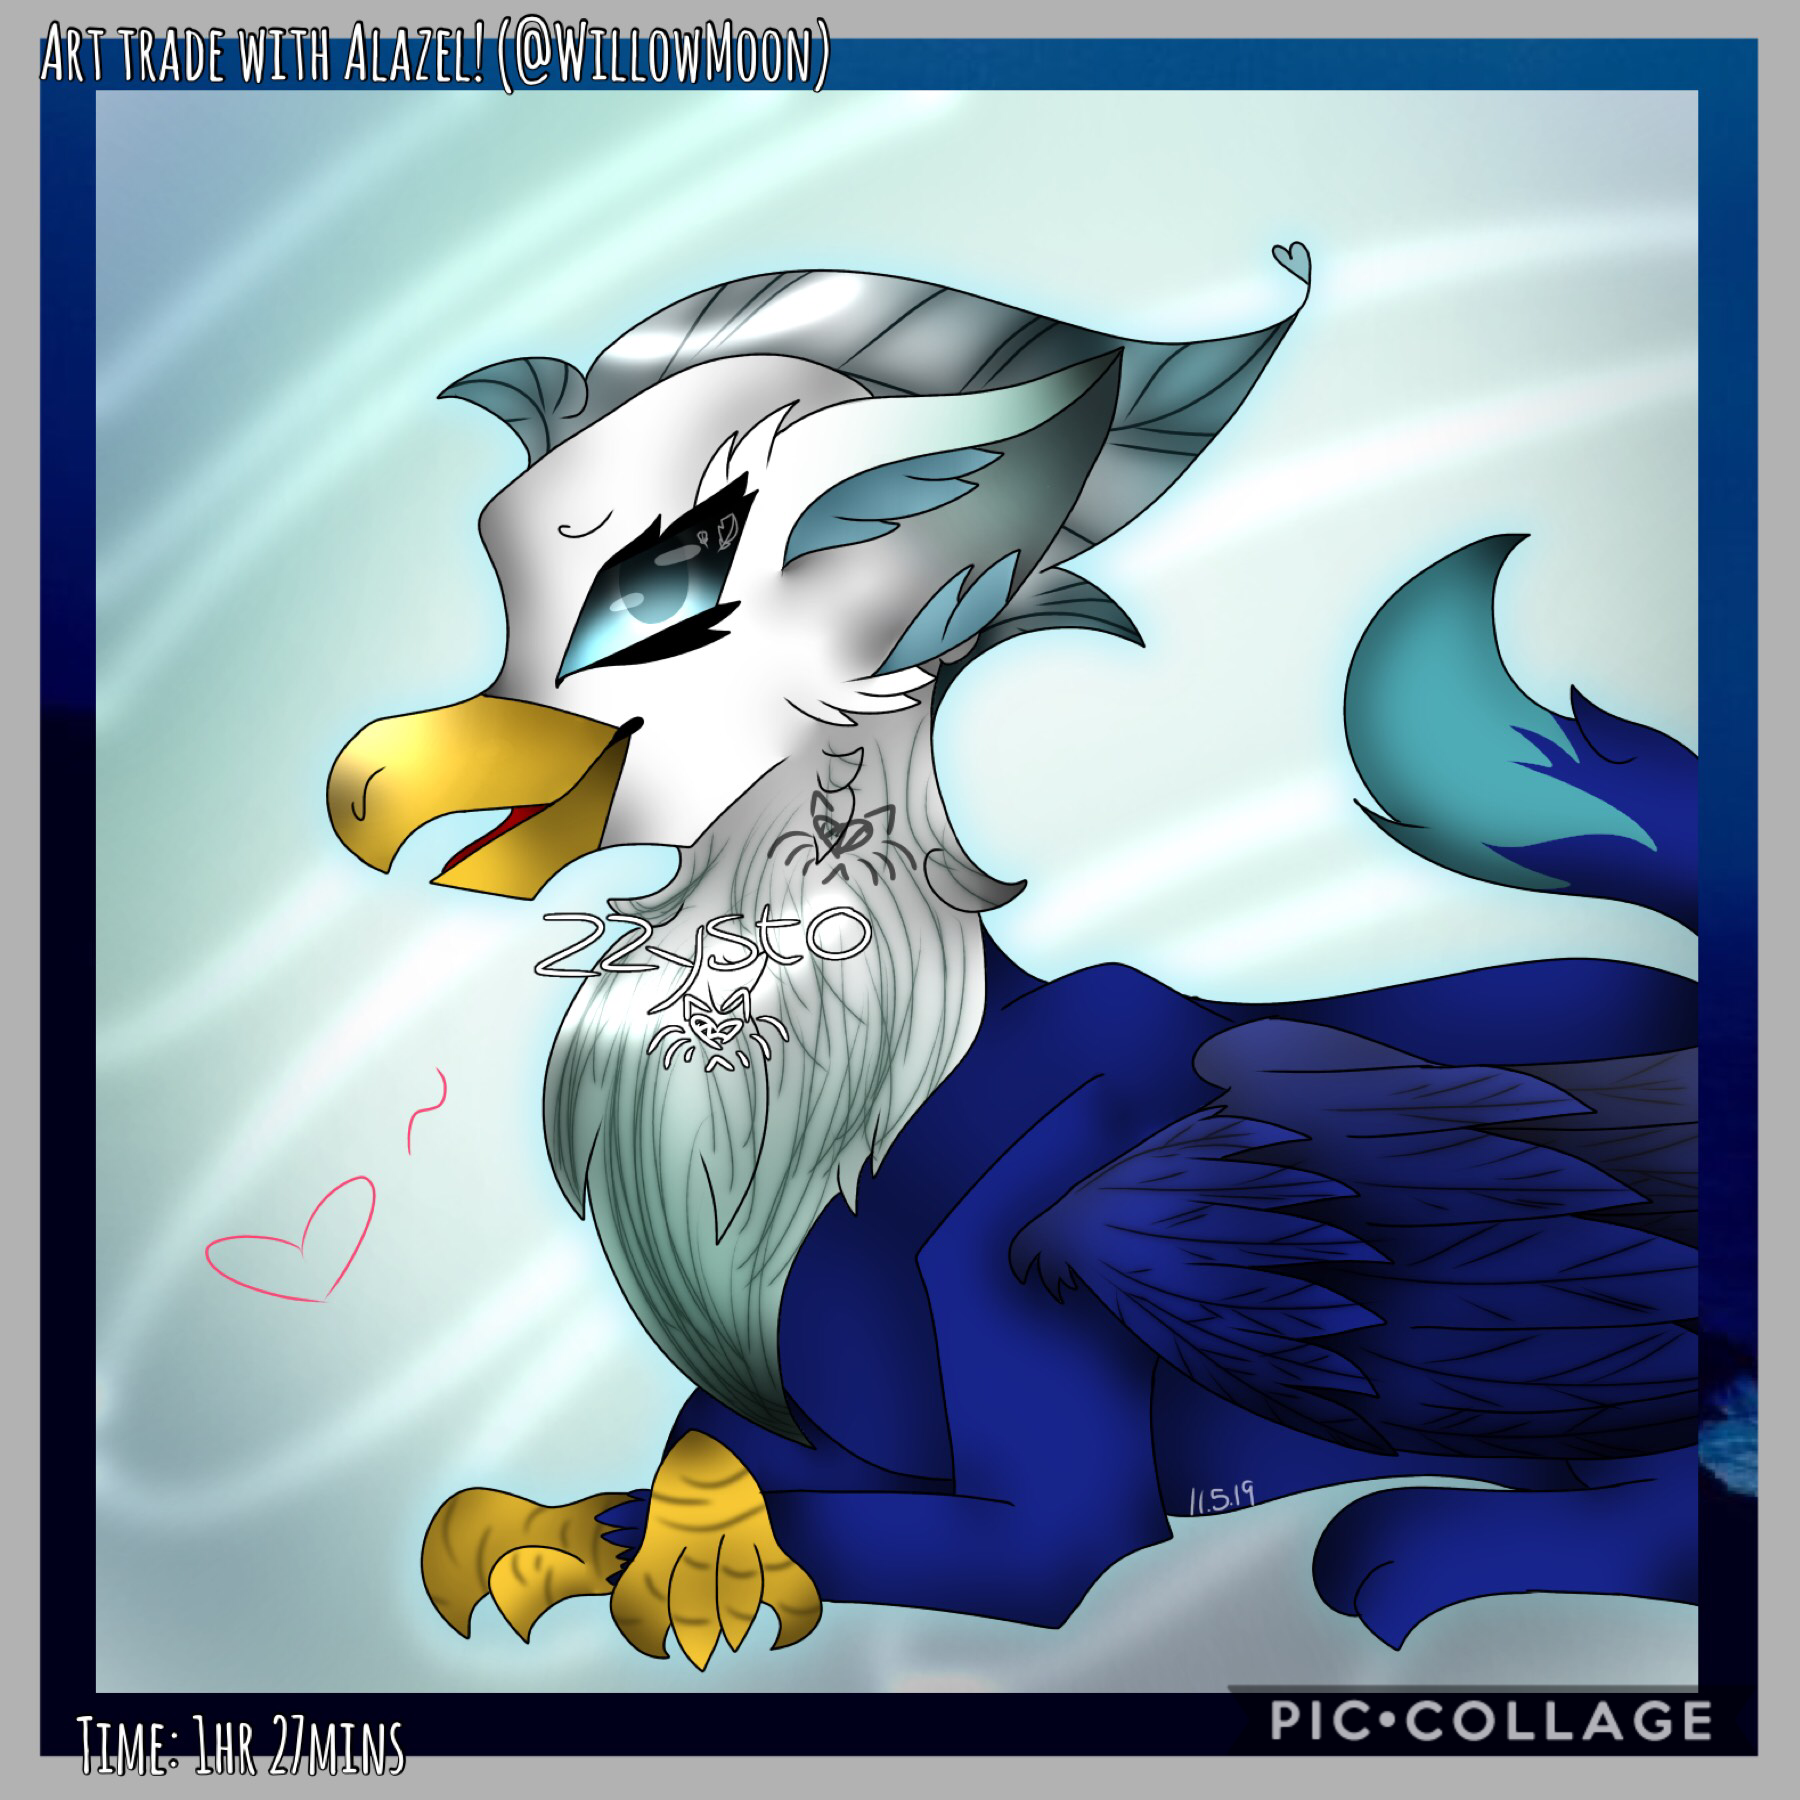 🕊Tap🕊
I didn’t think I’d finish this today, but I did- I’m quite happy with how this turned out! I hope you like it Alazel..! :3
Art trades are almost always open, it’s just no one asks until I point it out qwq 